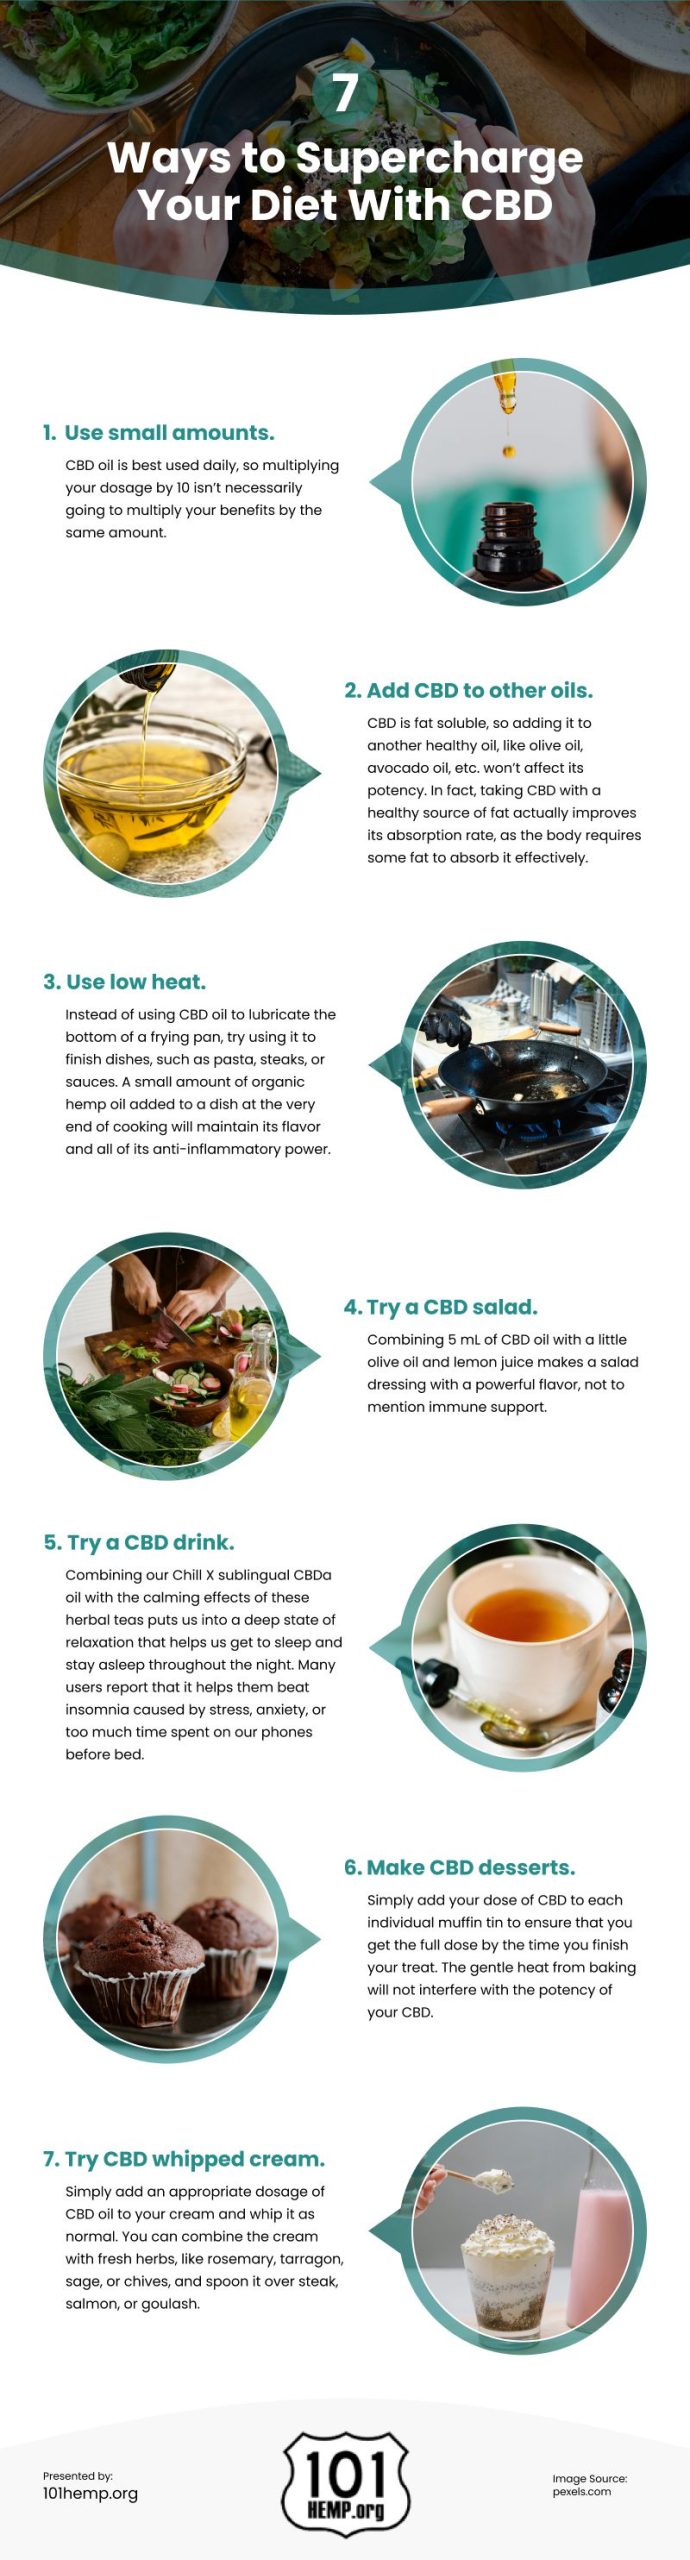 7 Ways to Supercharge Your Diet With CBD Infographic